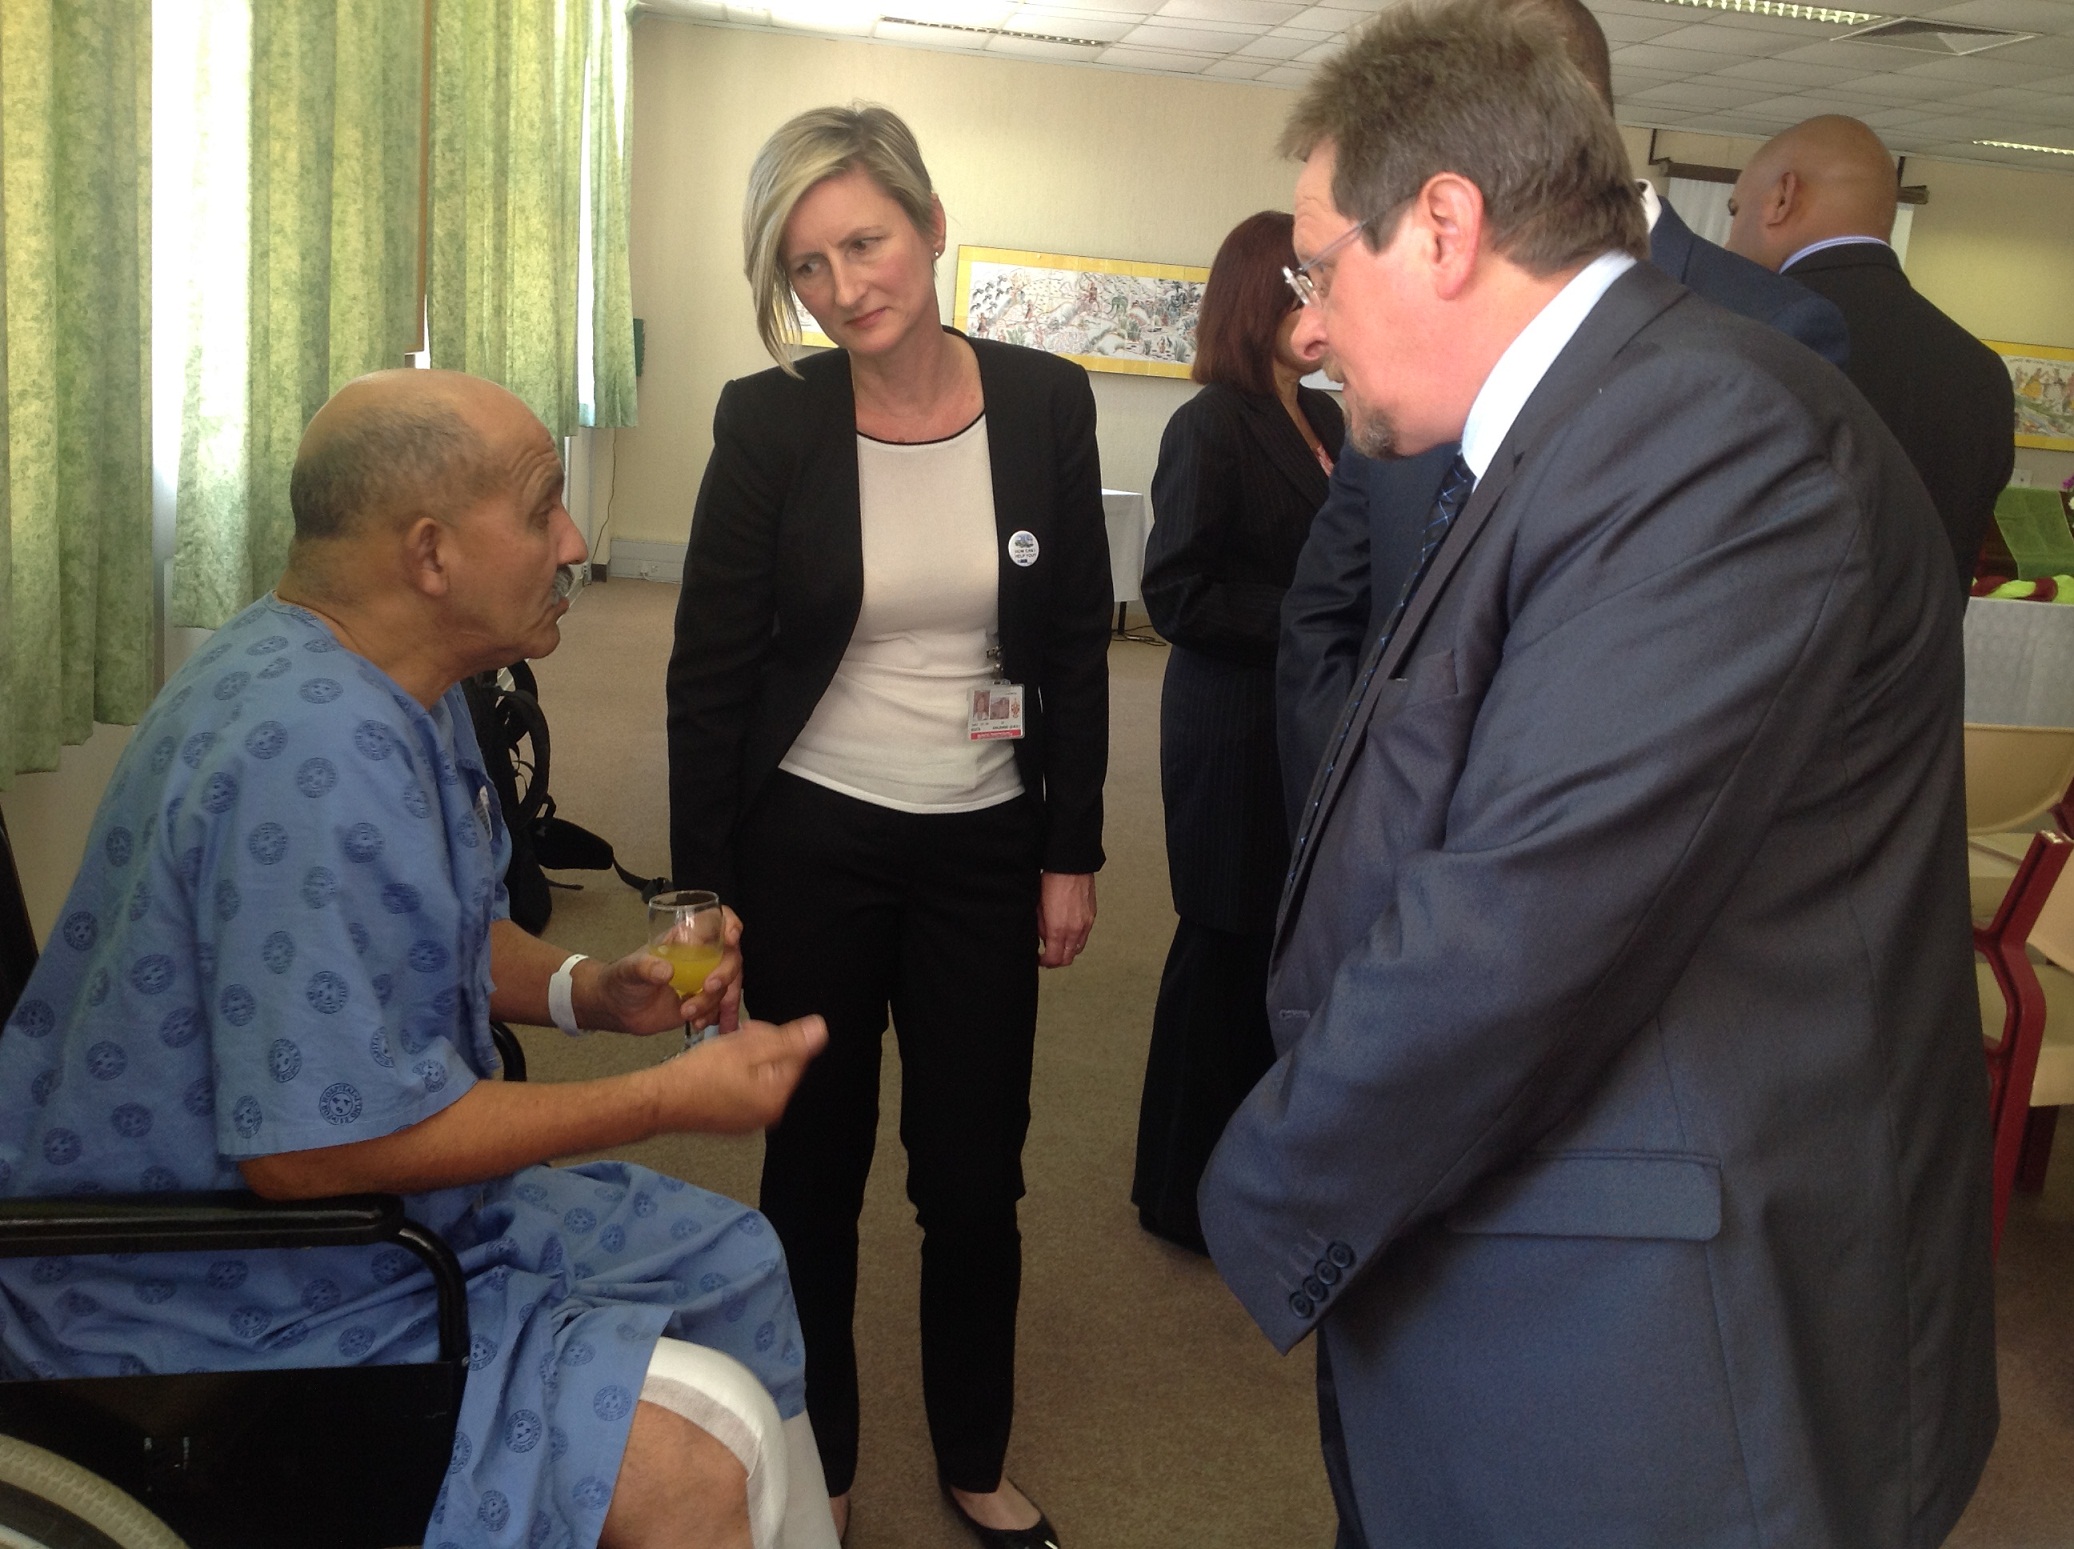 Minister Theuns Botha and Dr Agata Krajewski,Medical Superindent at Groote Schuur Hospital, speak to one of the patients Mr Vernon Scott.